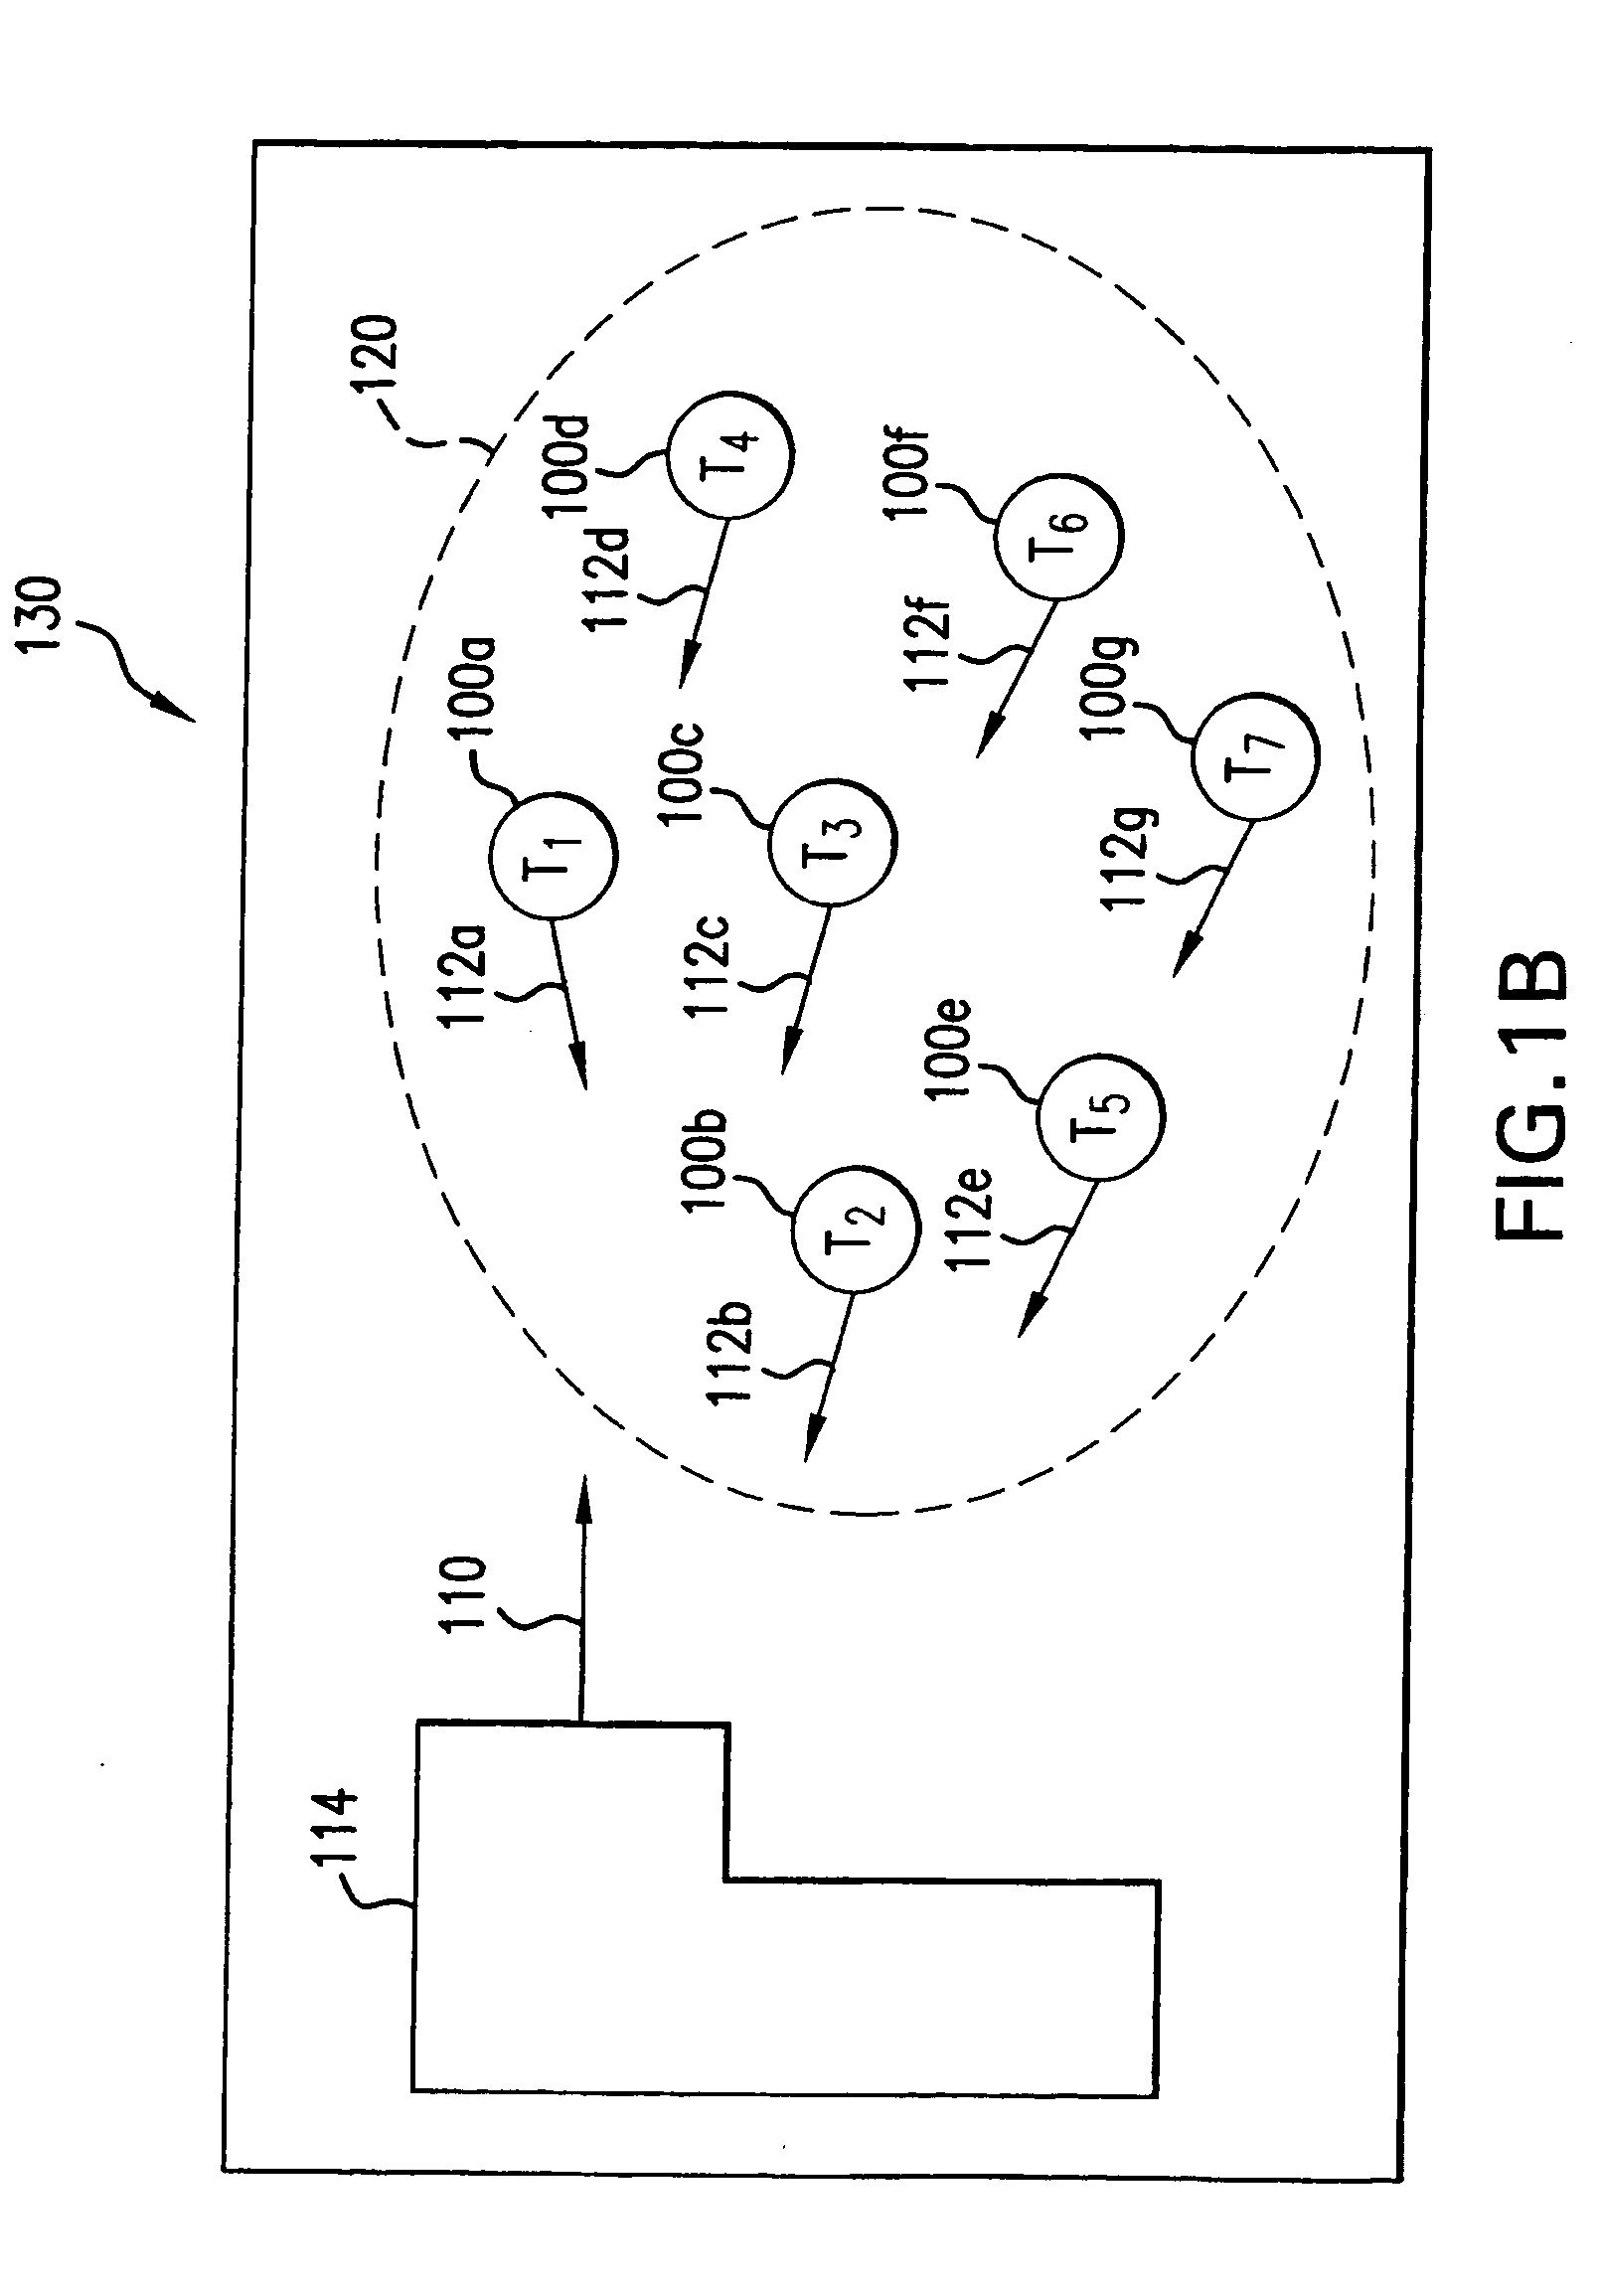 Method, system, and apparatus for a radio frequency identification (RFID) waveguide for reading items in a stack